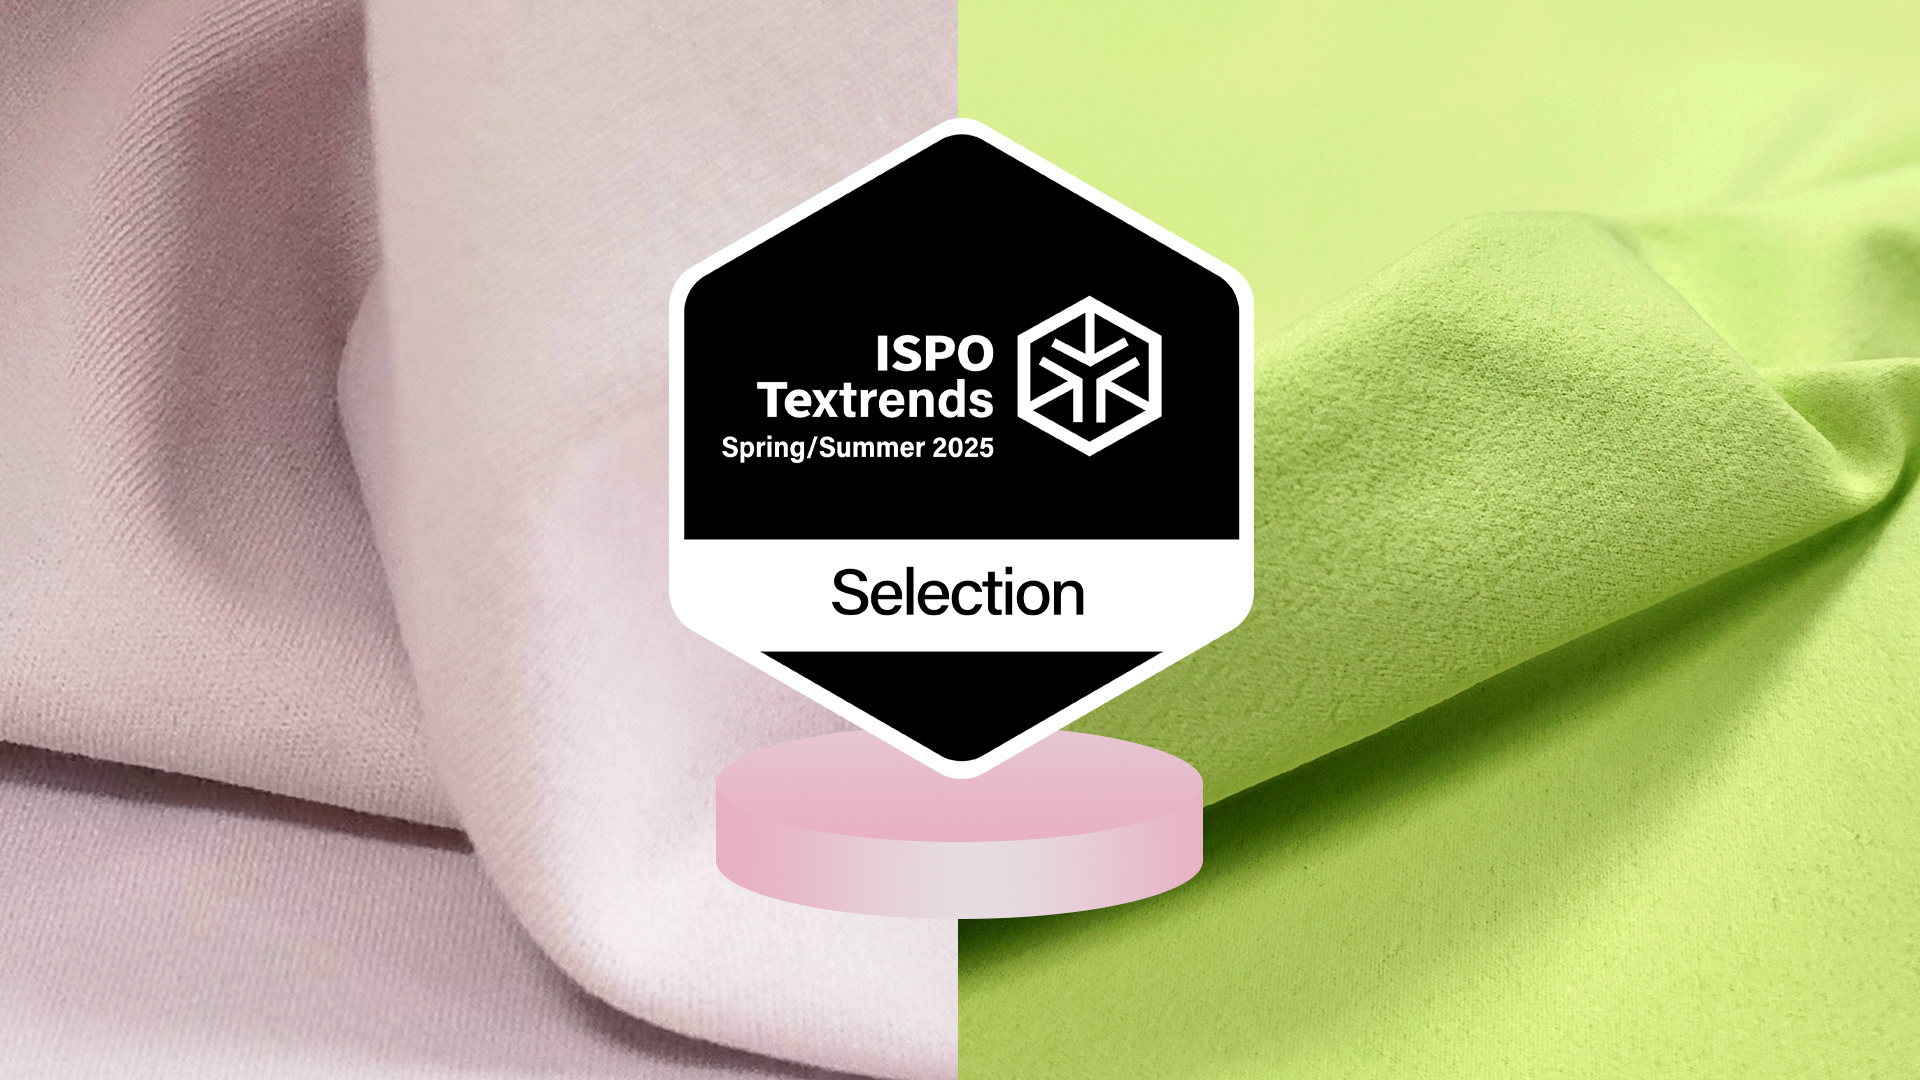 ISPO Textrends - Selection